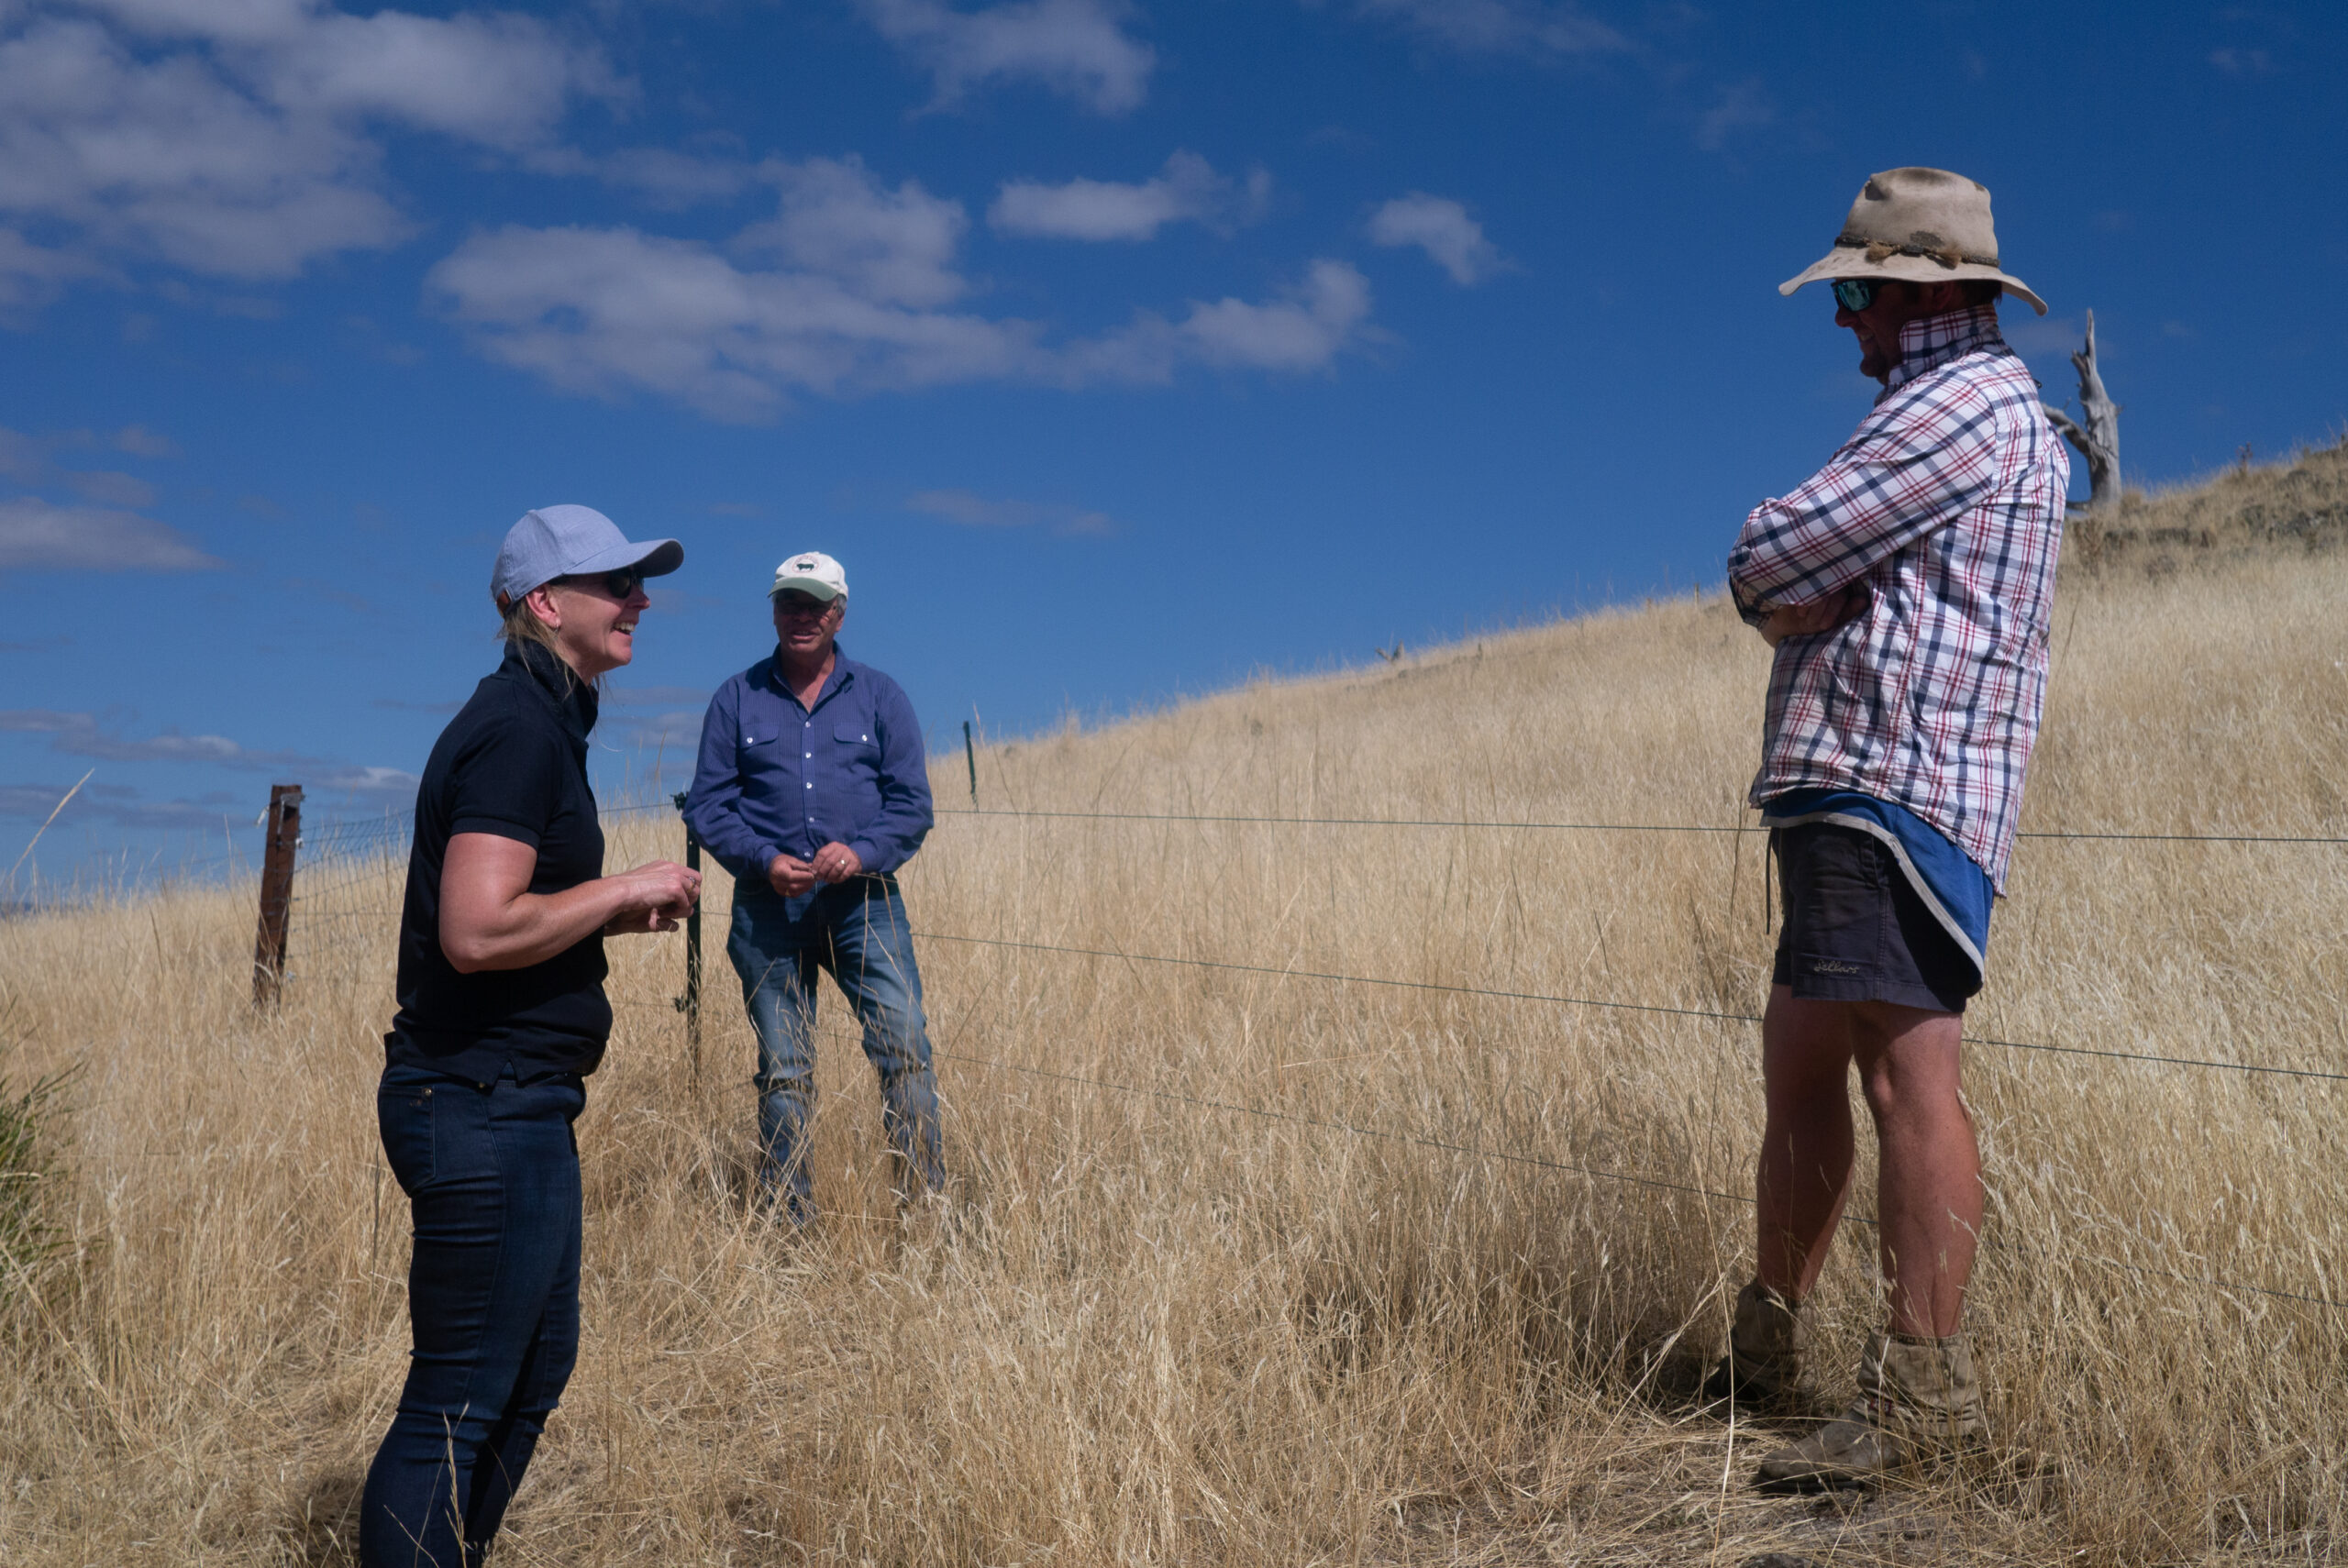 Group of three people standing a dry field and talking